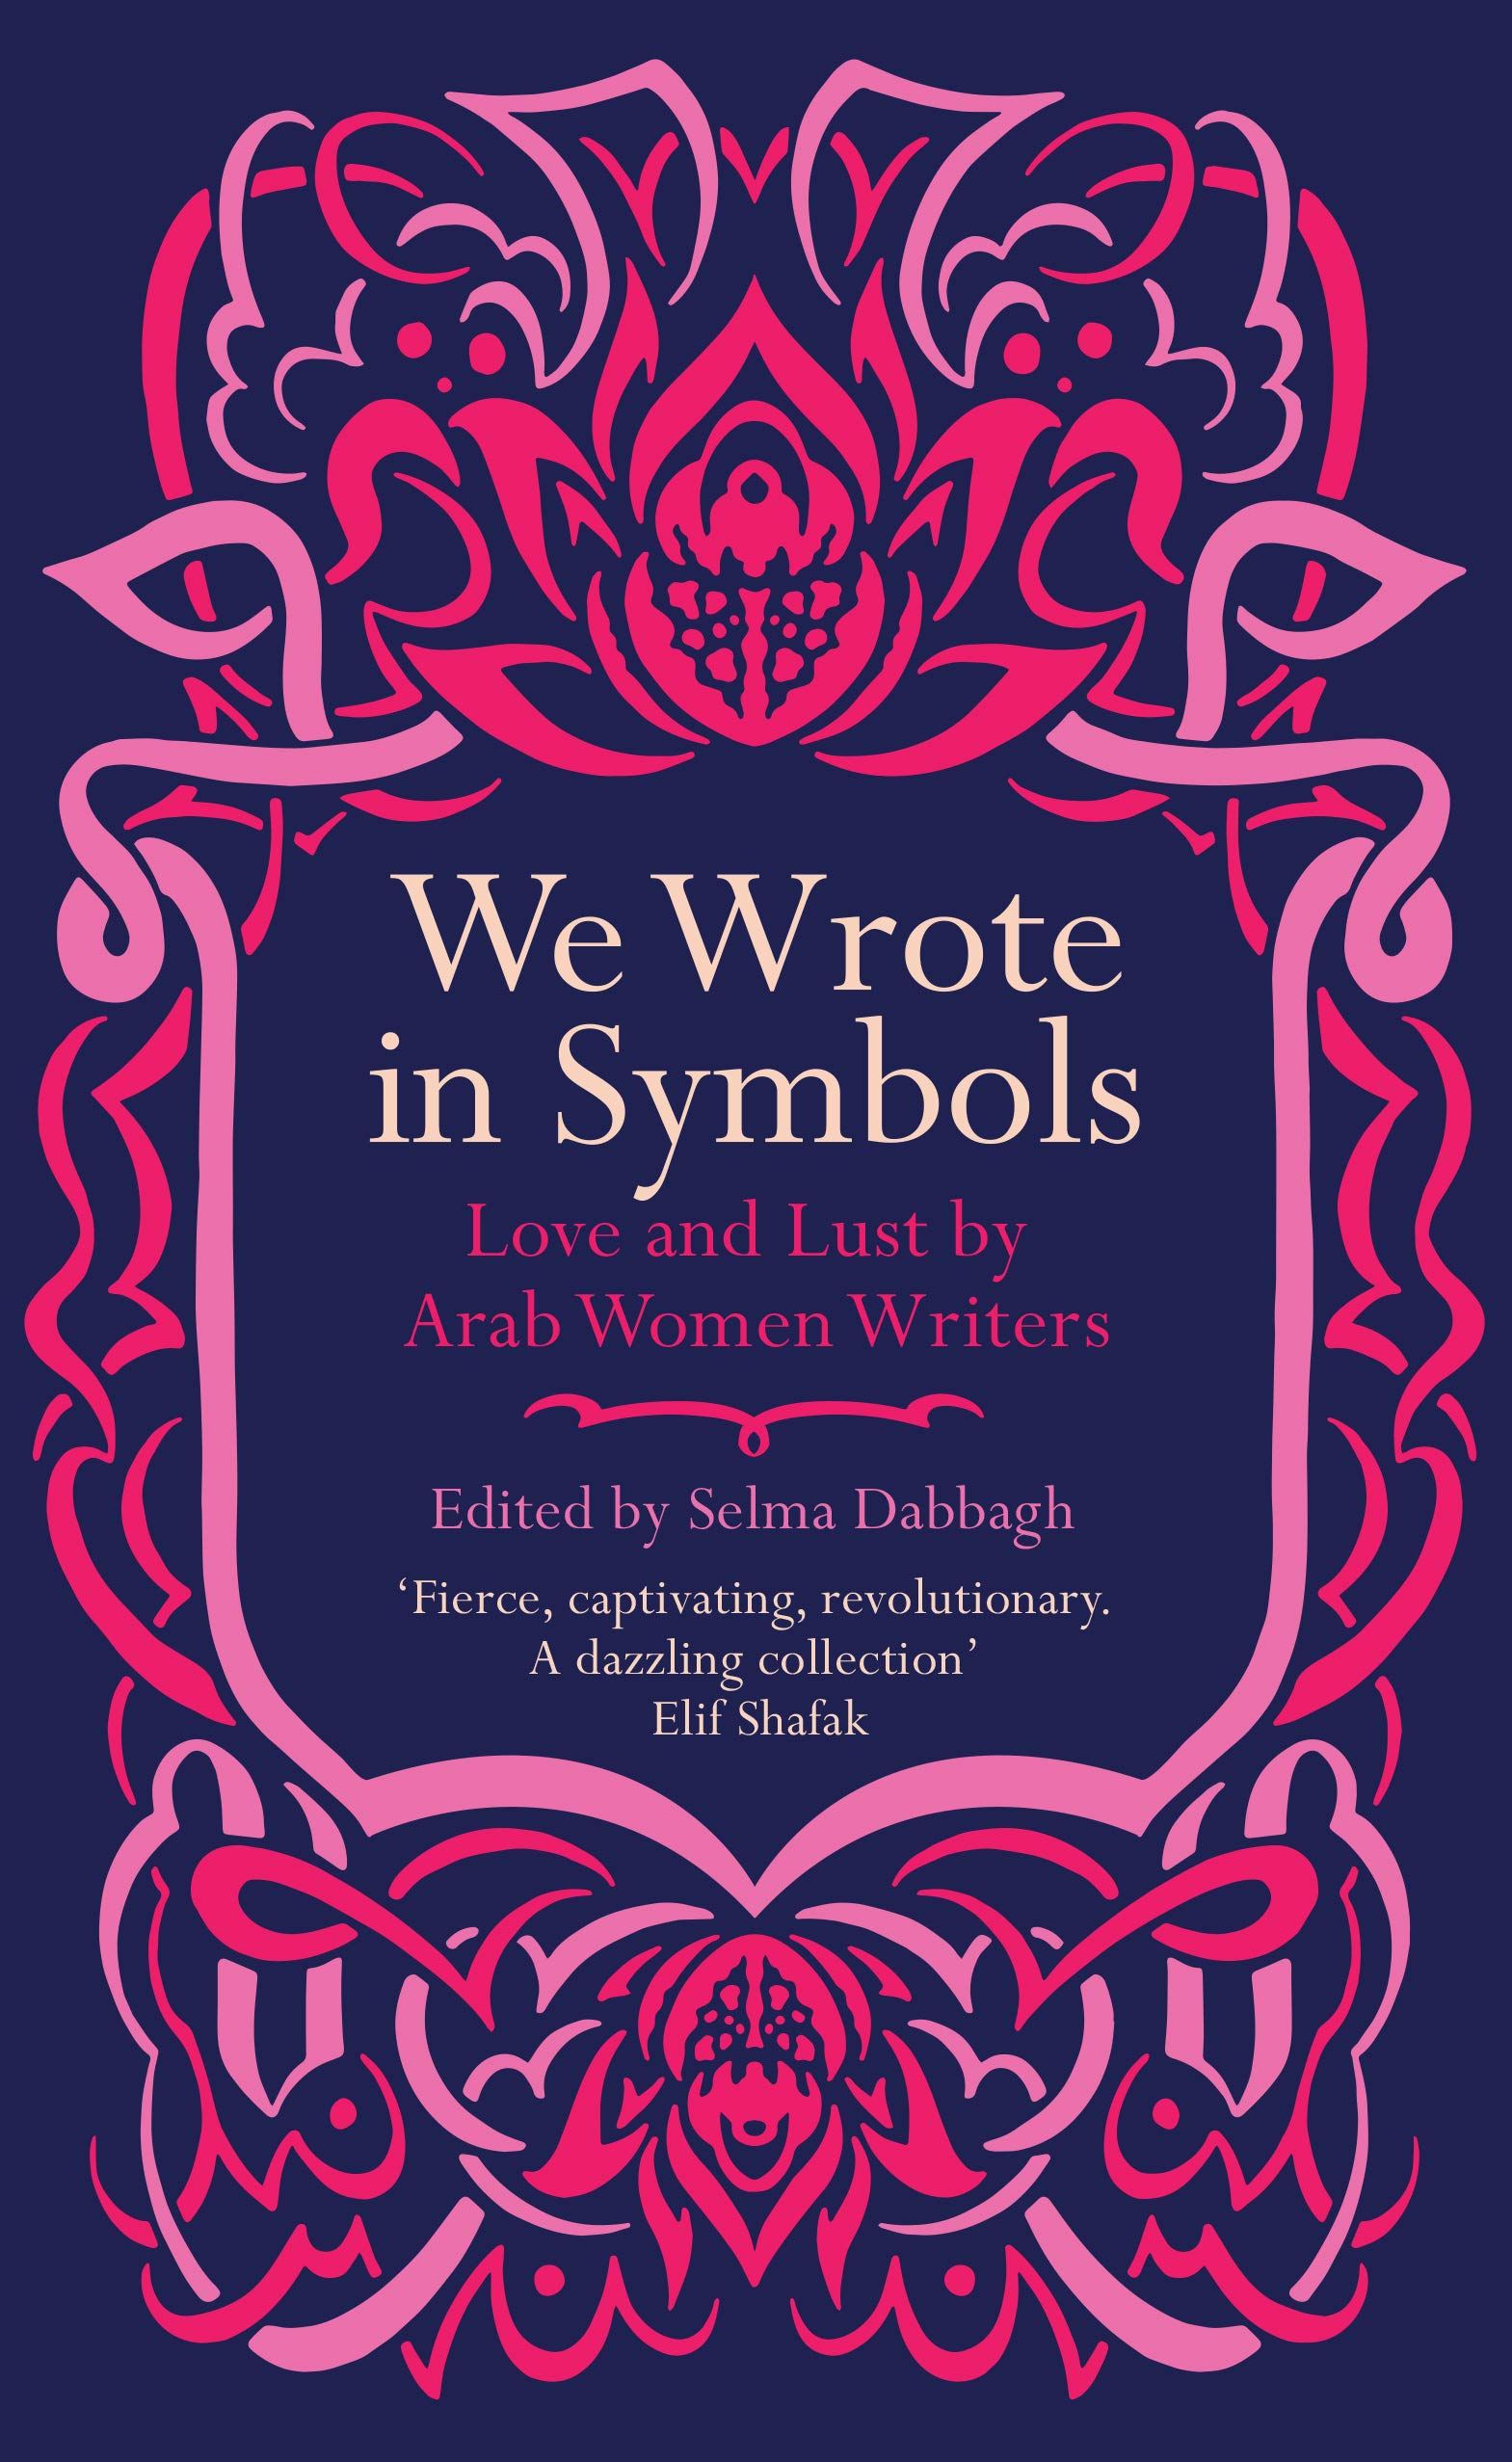 Livro: We wrote in symbols - Love and Lust by Arab Women Writers